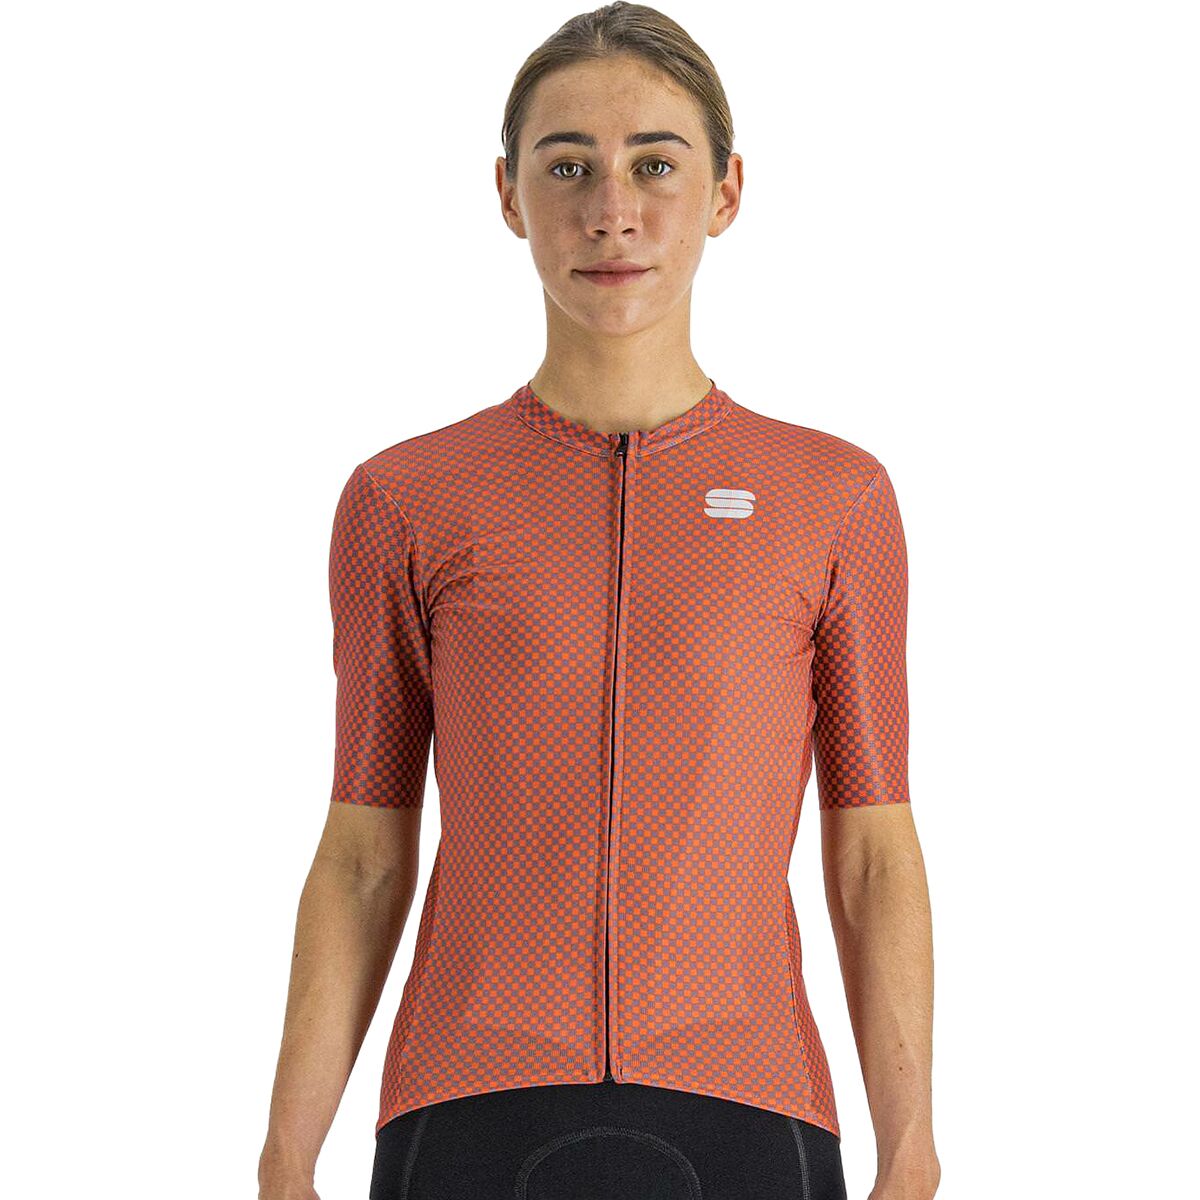 Sportful Checkmate Jersey - Women's